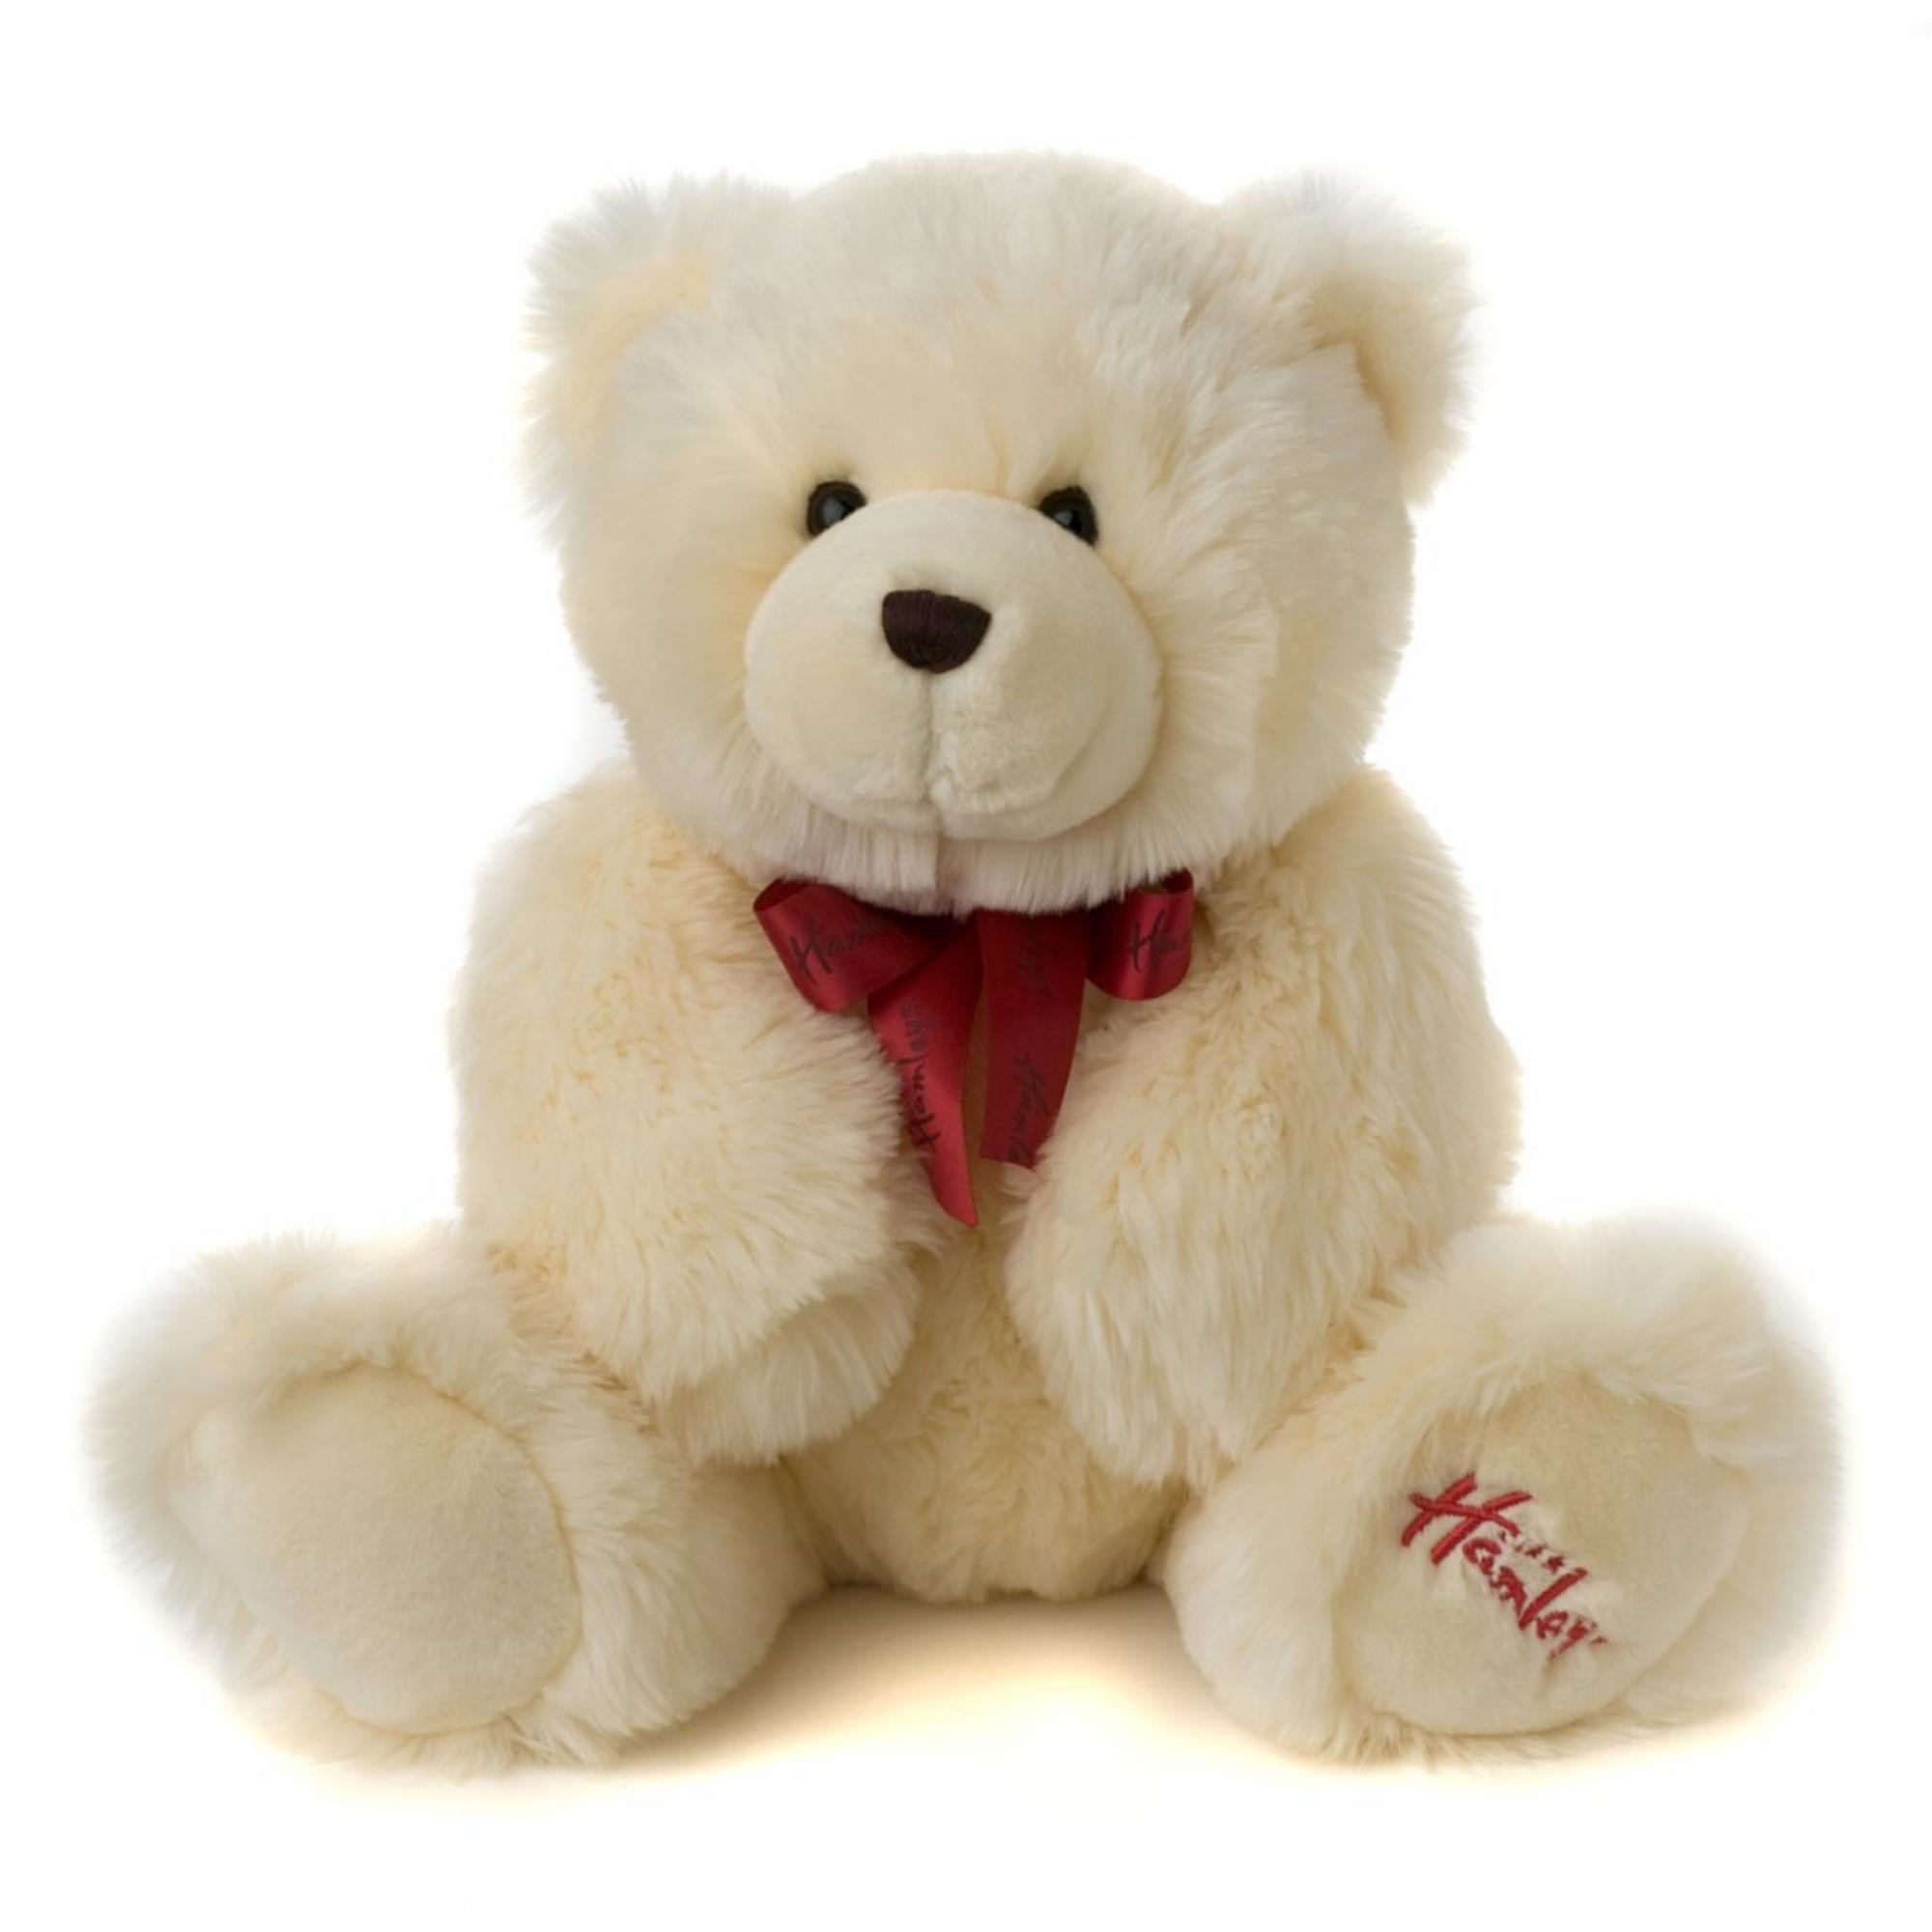 2000x2000 HQ  px Resolution Teddy Bear - Wallpapers and Pictures BackGrounds  Collection for mobile and desktop